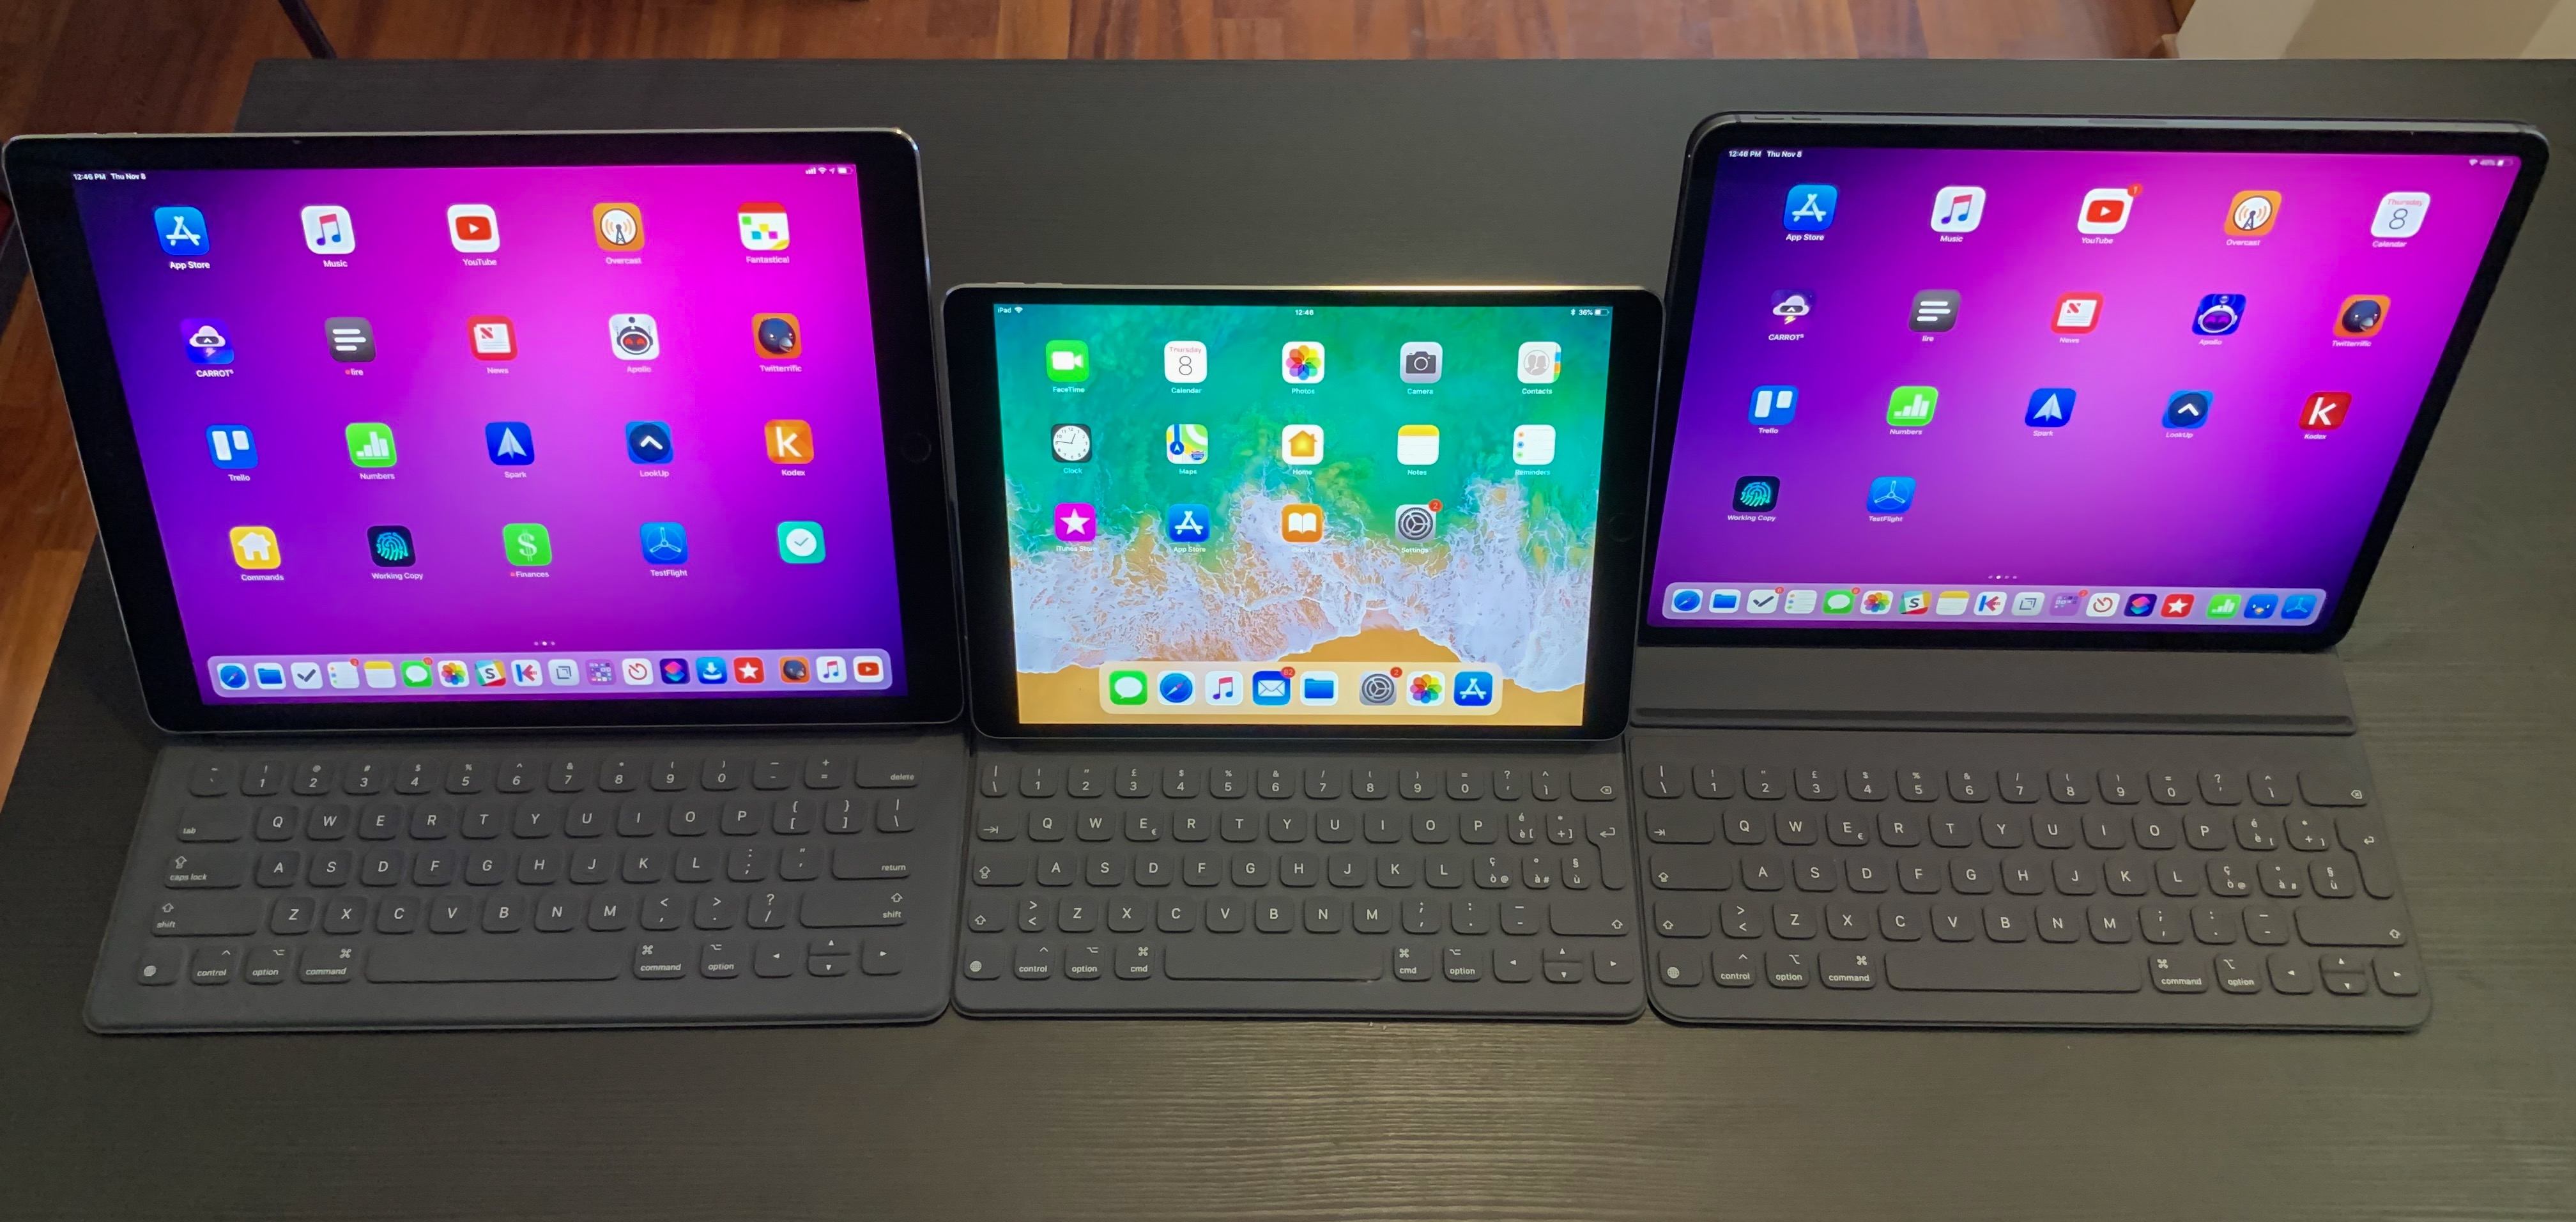 The Smart Keyboard Folio (right) compared to the Smart Keyboard for the 12.9" and 10.5" iPad Pros.